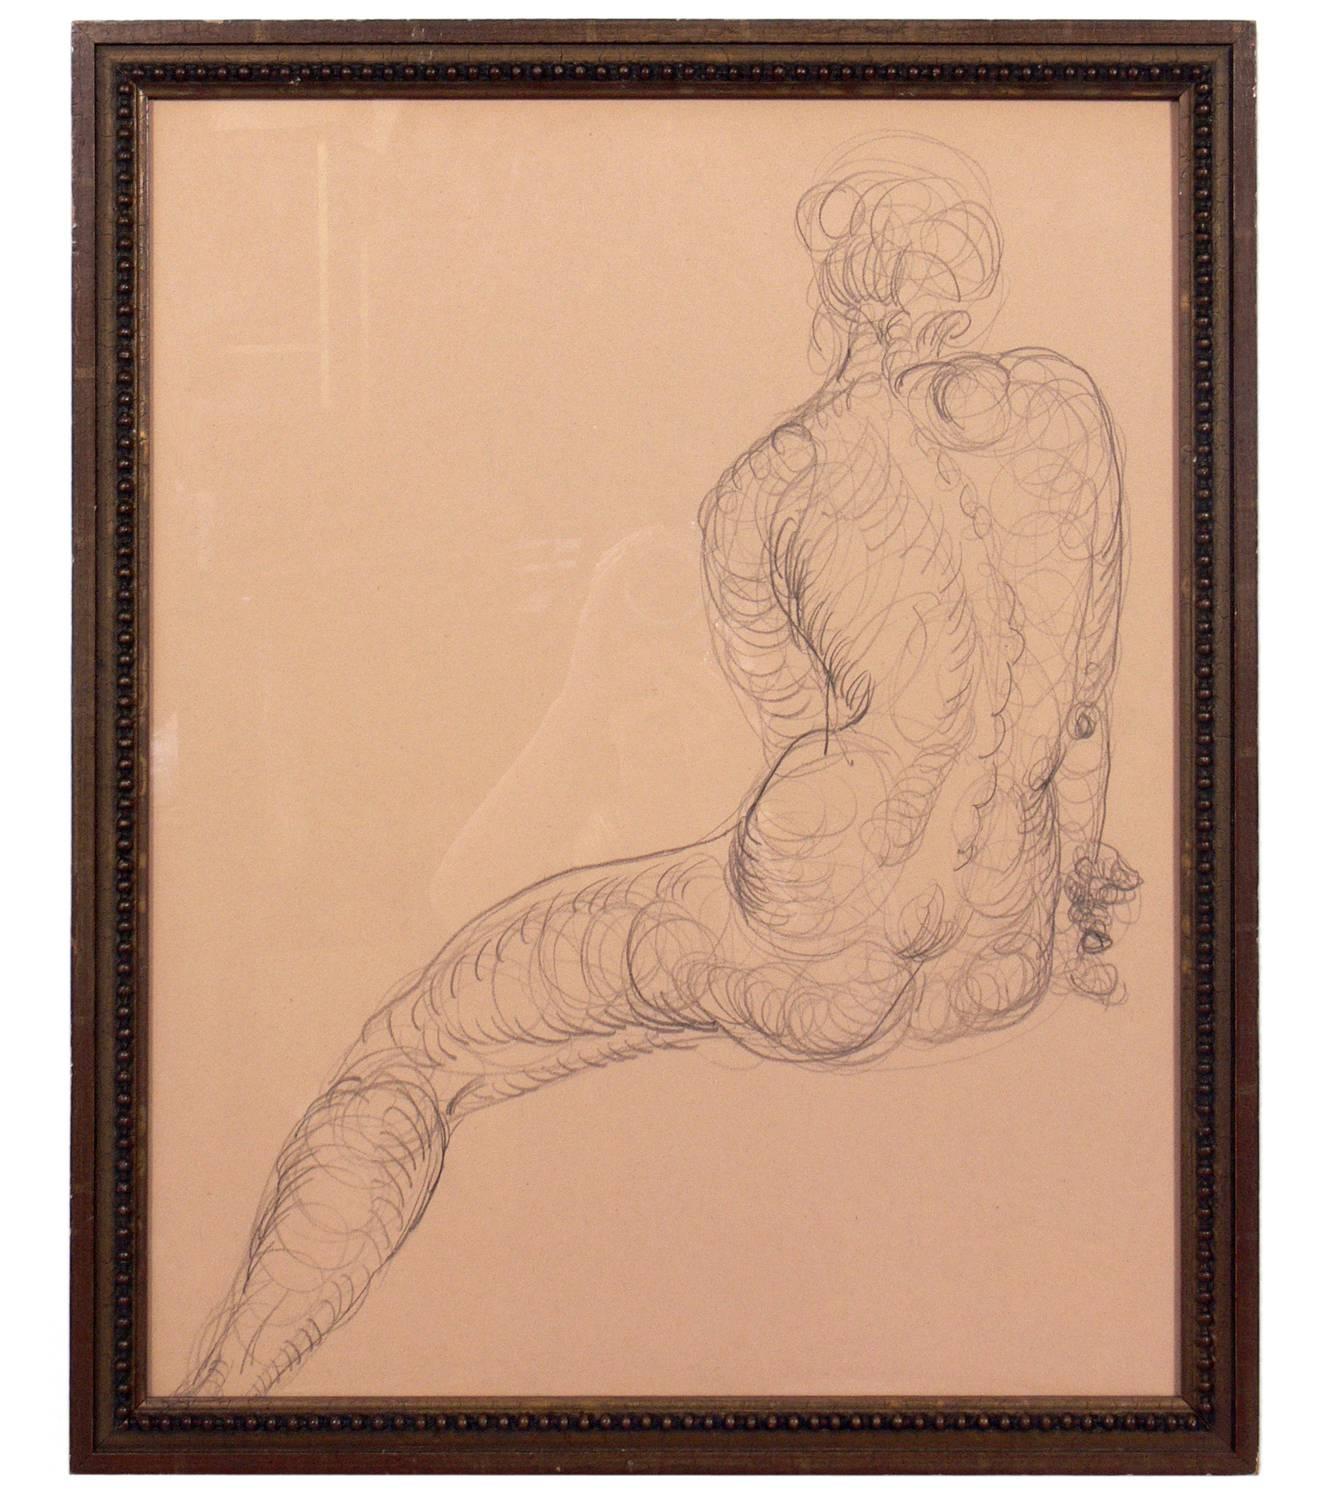 Selection of Figural Line Drawings or Gallery Wall by Miriam Kubach 1